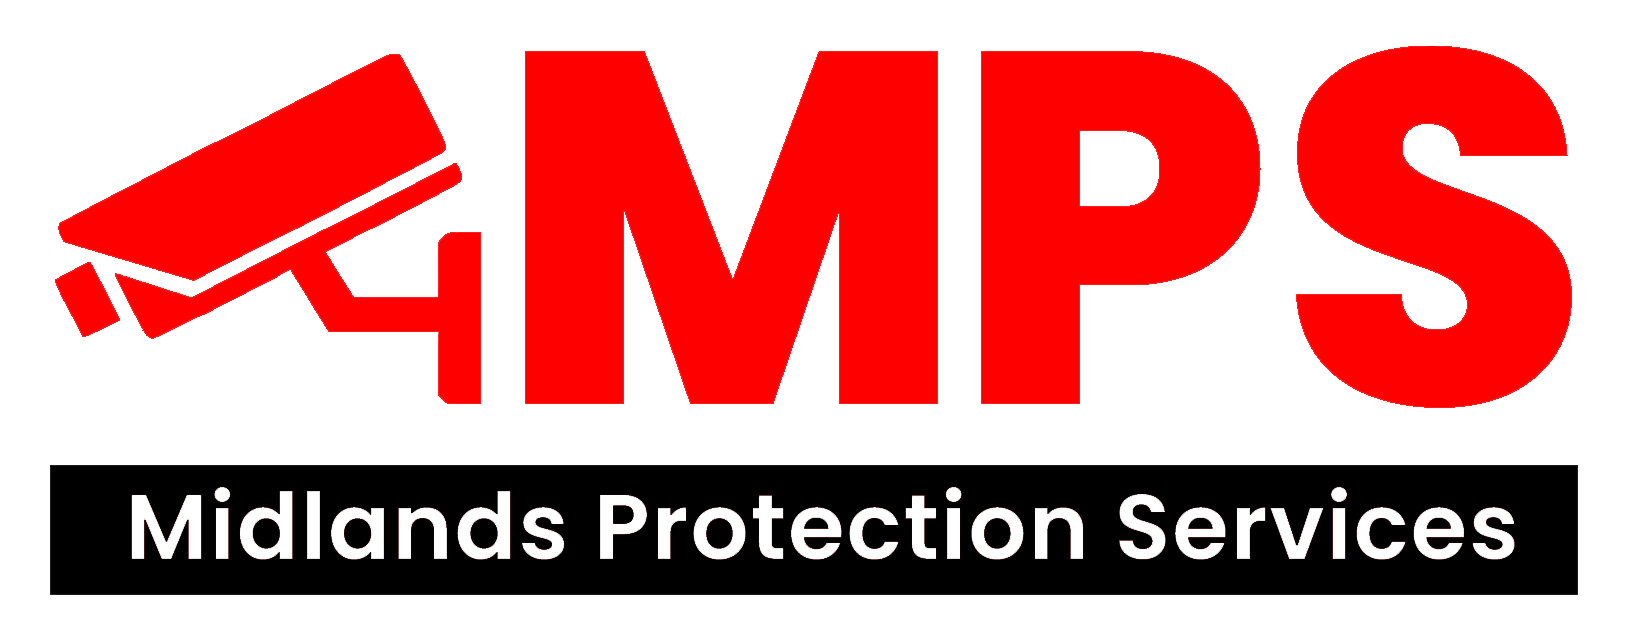 logo for Midlands Protection Services